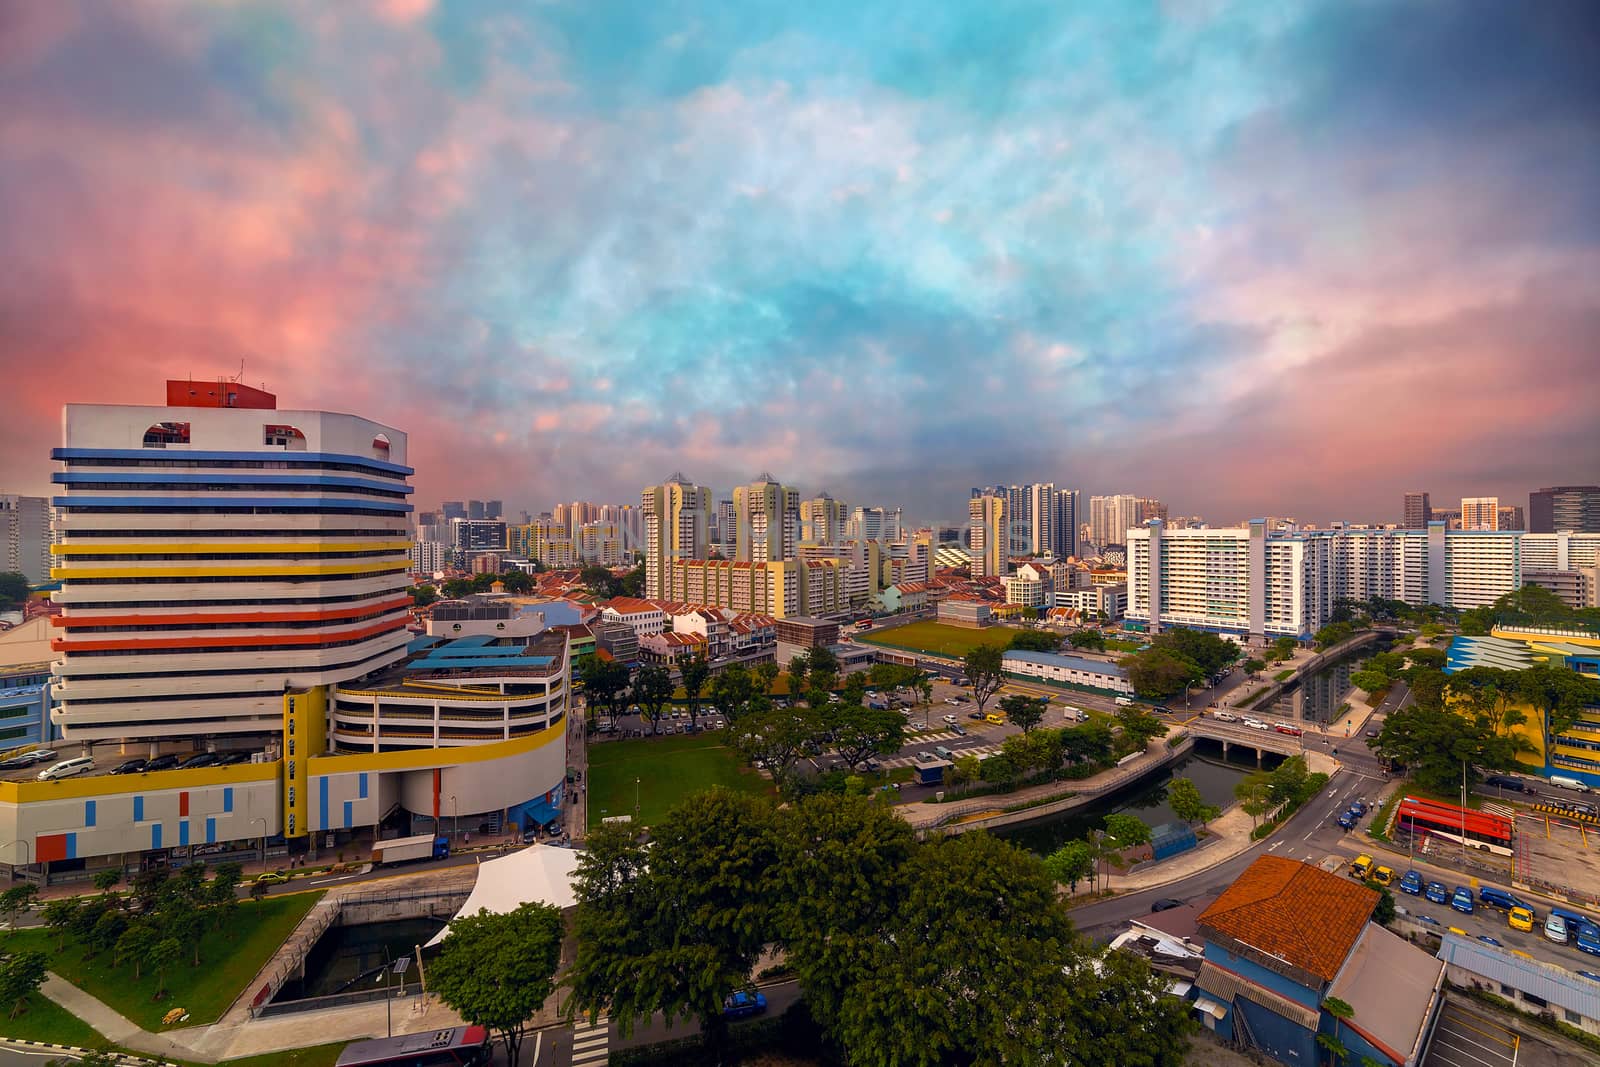 Singapore Rochor Commercial and Residential Mixed Area by Davidgn